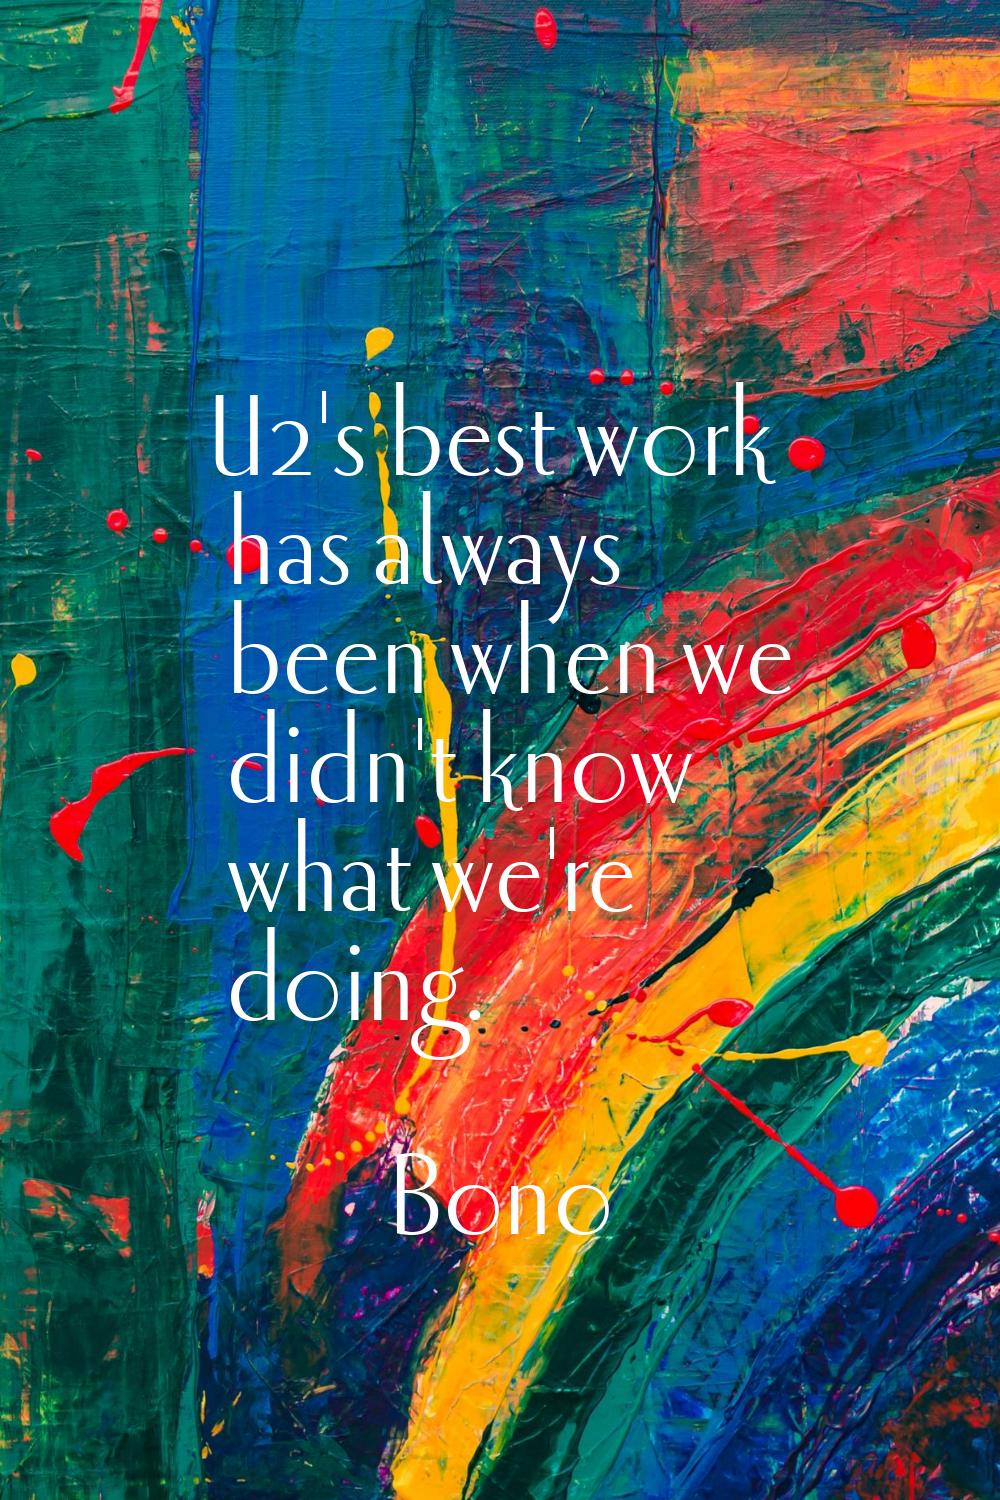 U2's best work has always been when we didn't know what we're doing.